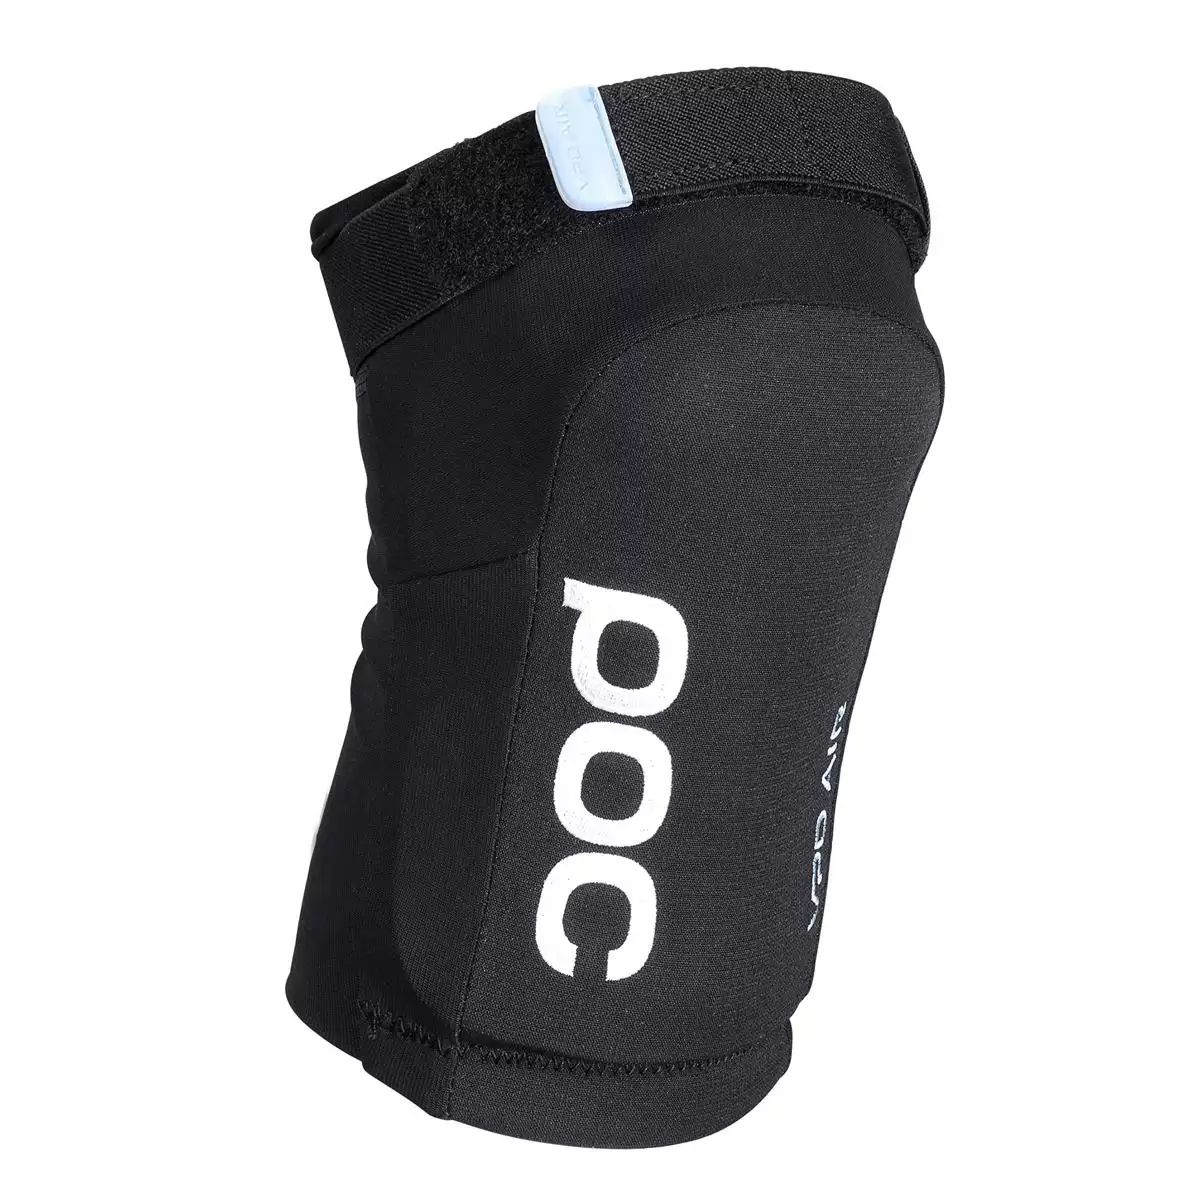 Joint VPD Air Knee pads black Size S - image